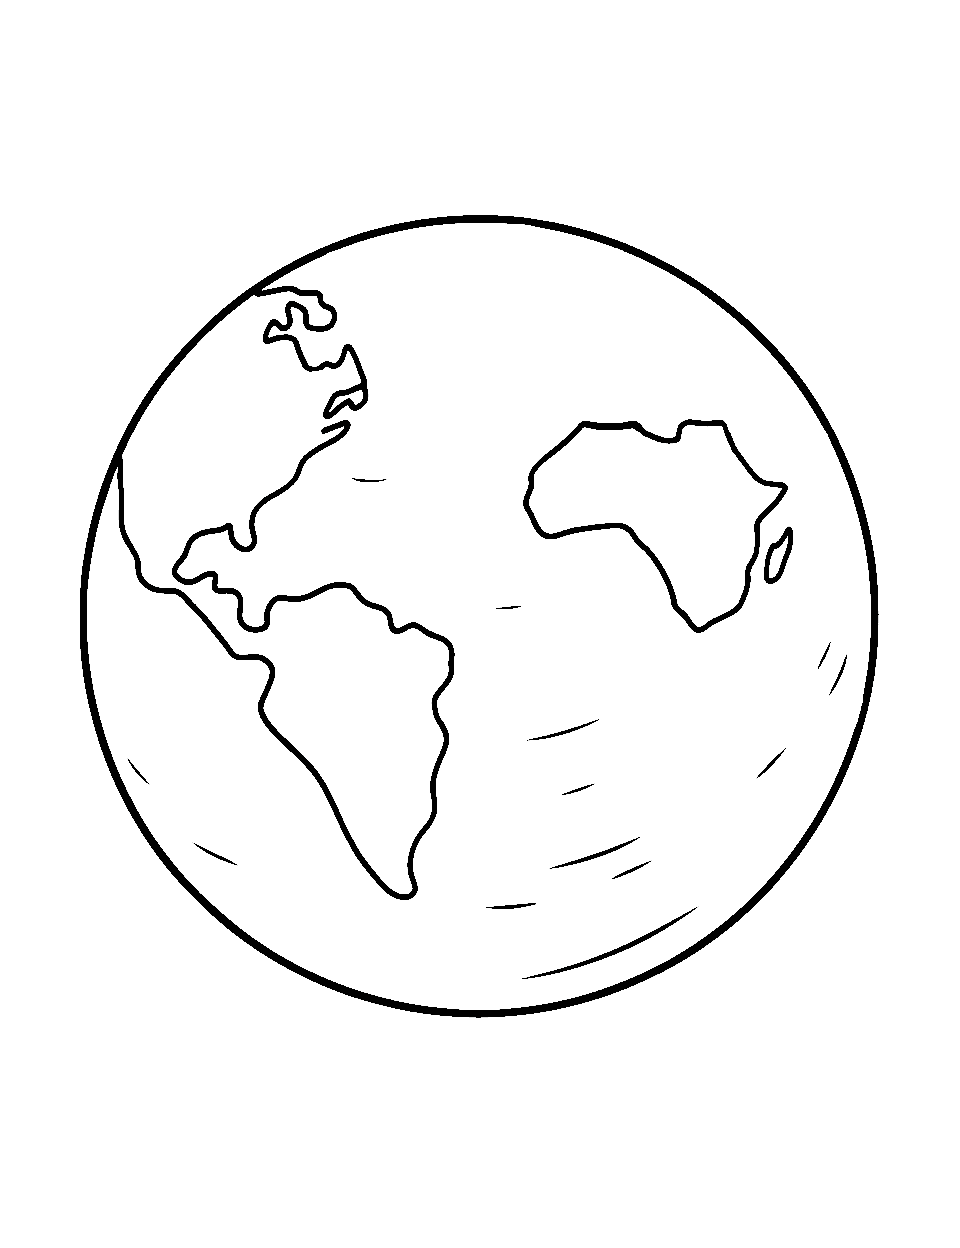 Easy-to-Color Earth Coloring Page - A basic design of Earth, perfect for young kids to color.